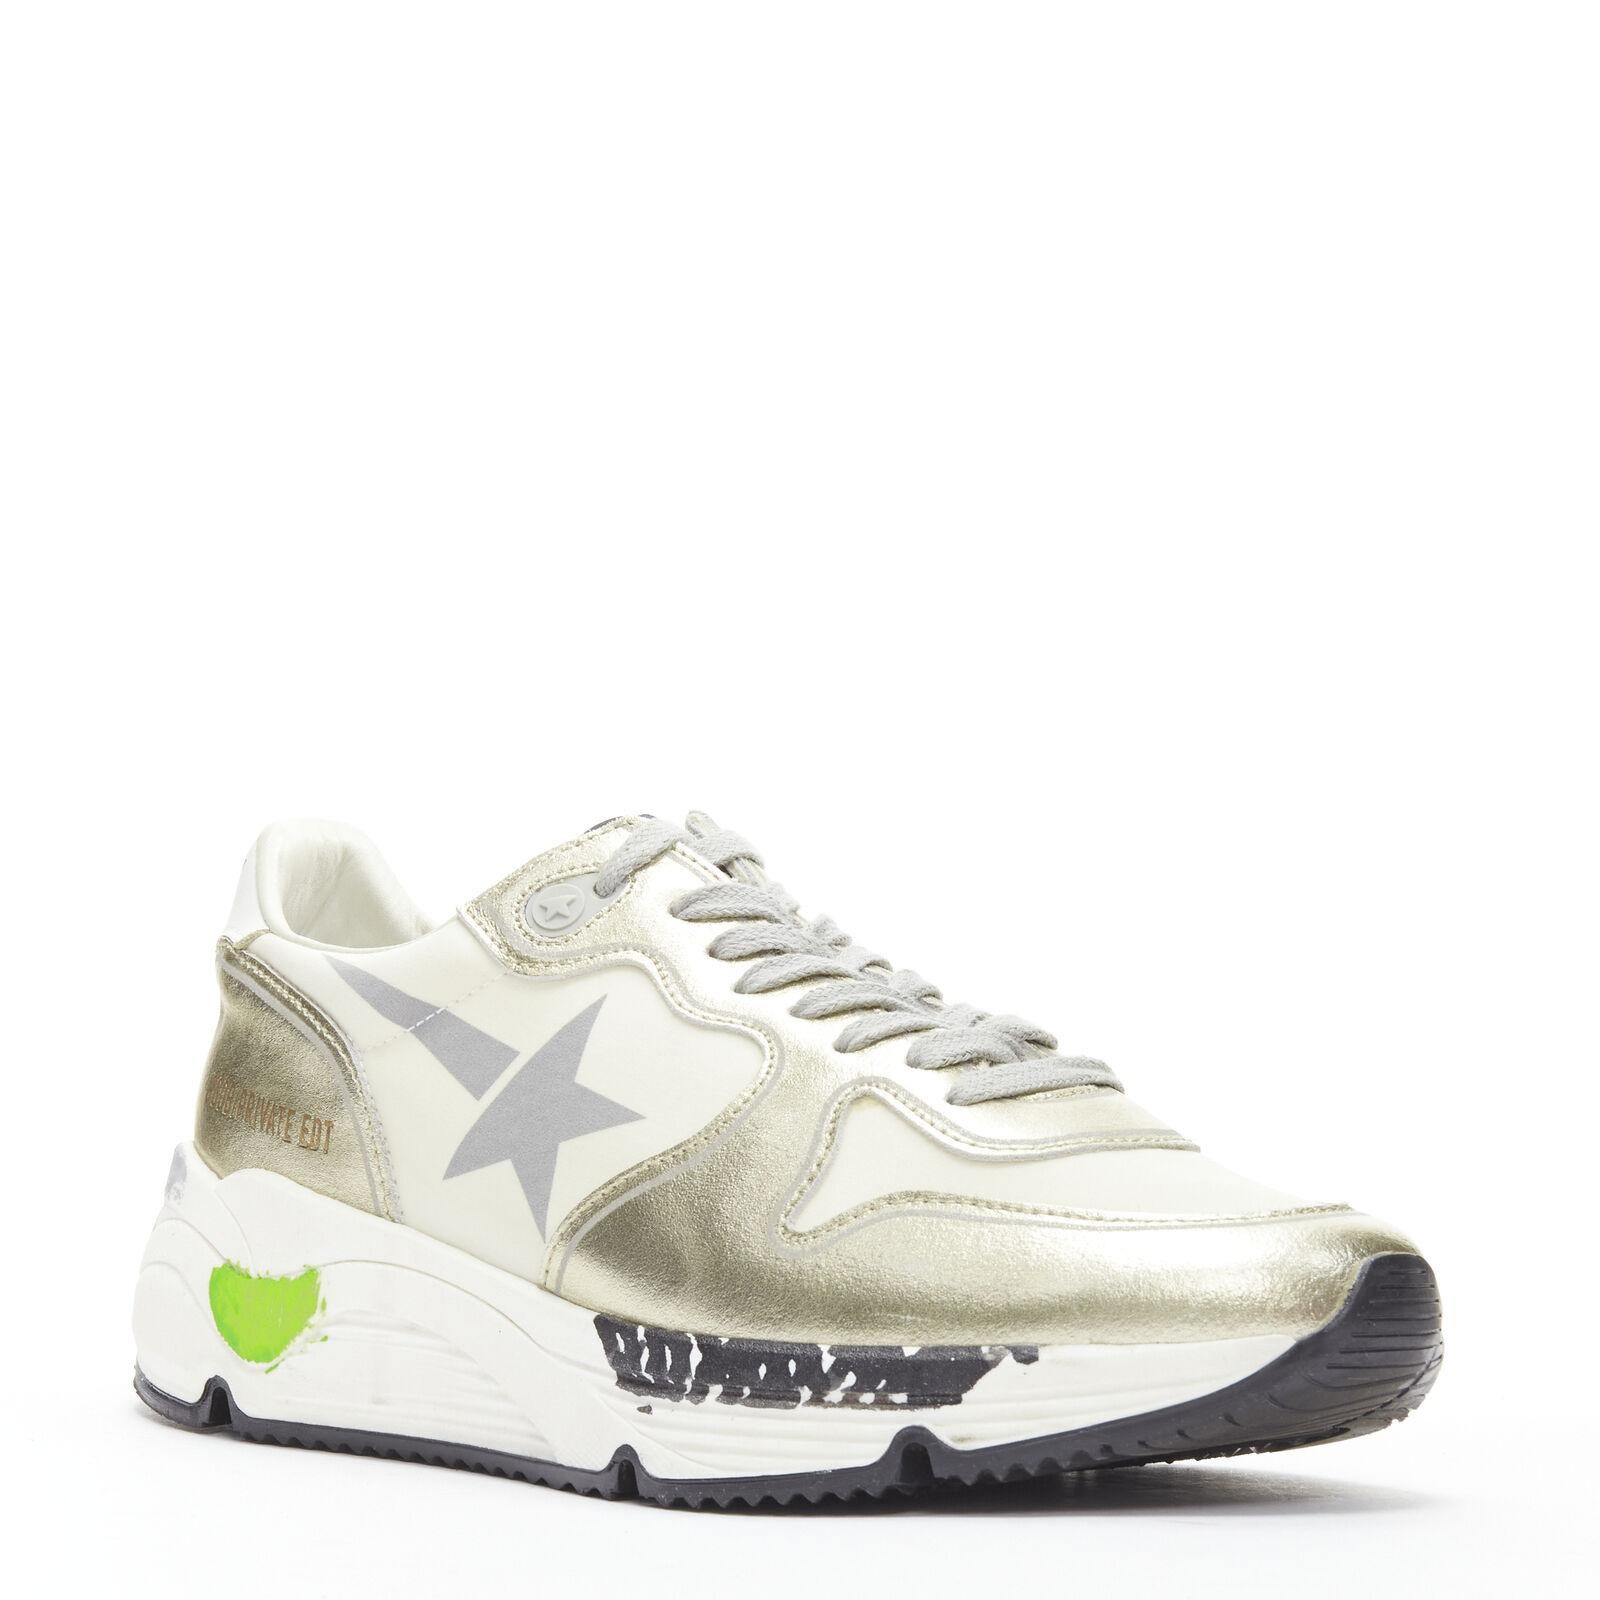 GOLDEN GOOSE Private EDT Running chunky metallic gold distressed sneaker EU38
Référence : AAWC/A00139
Marque : Golden Goose
Modèle : Running Private EDT (en anglais)
MATERIAL : Cuir, Fabrice
Couleur : or, beige
Motif : Solide
Fermeture :